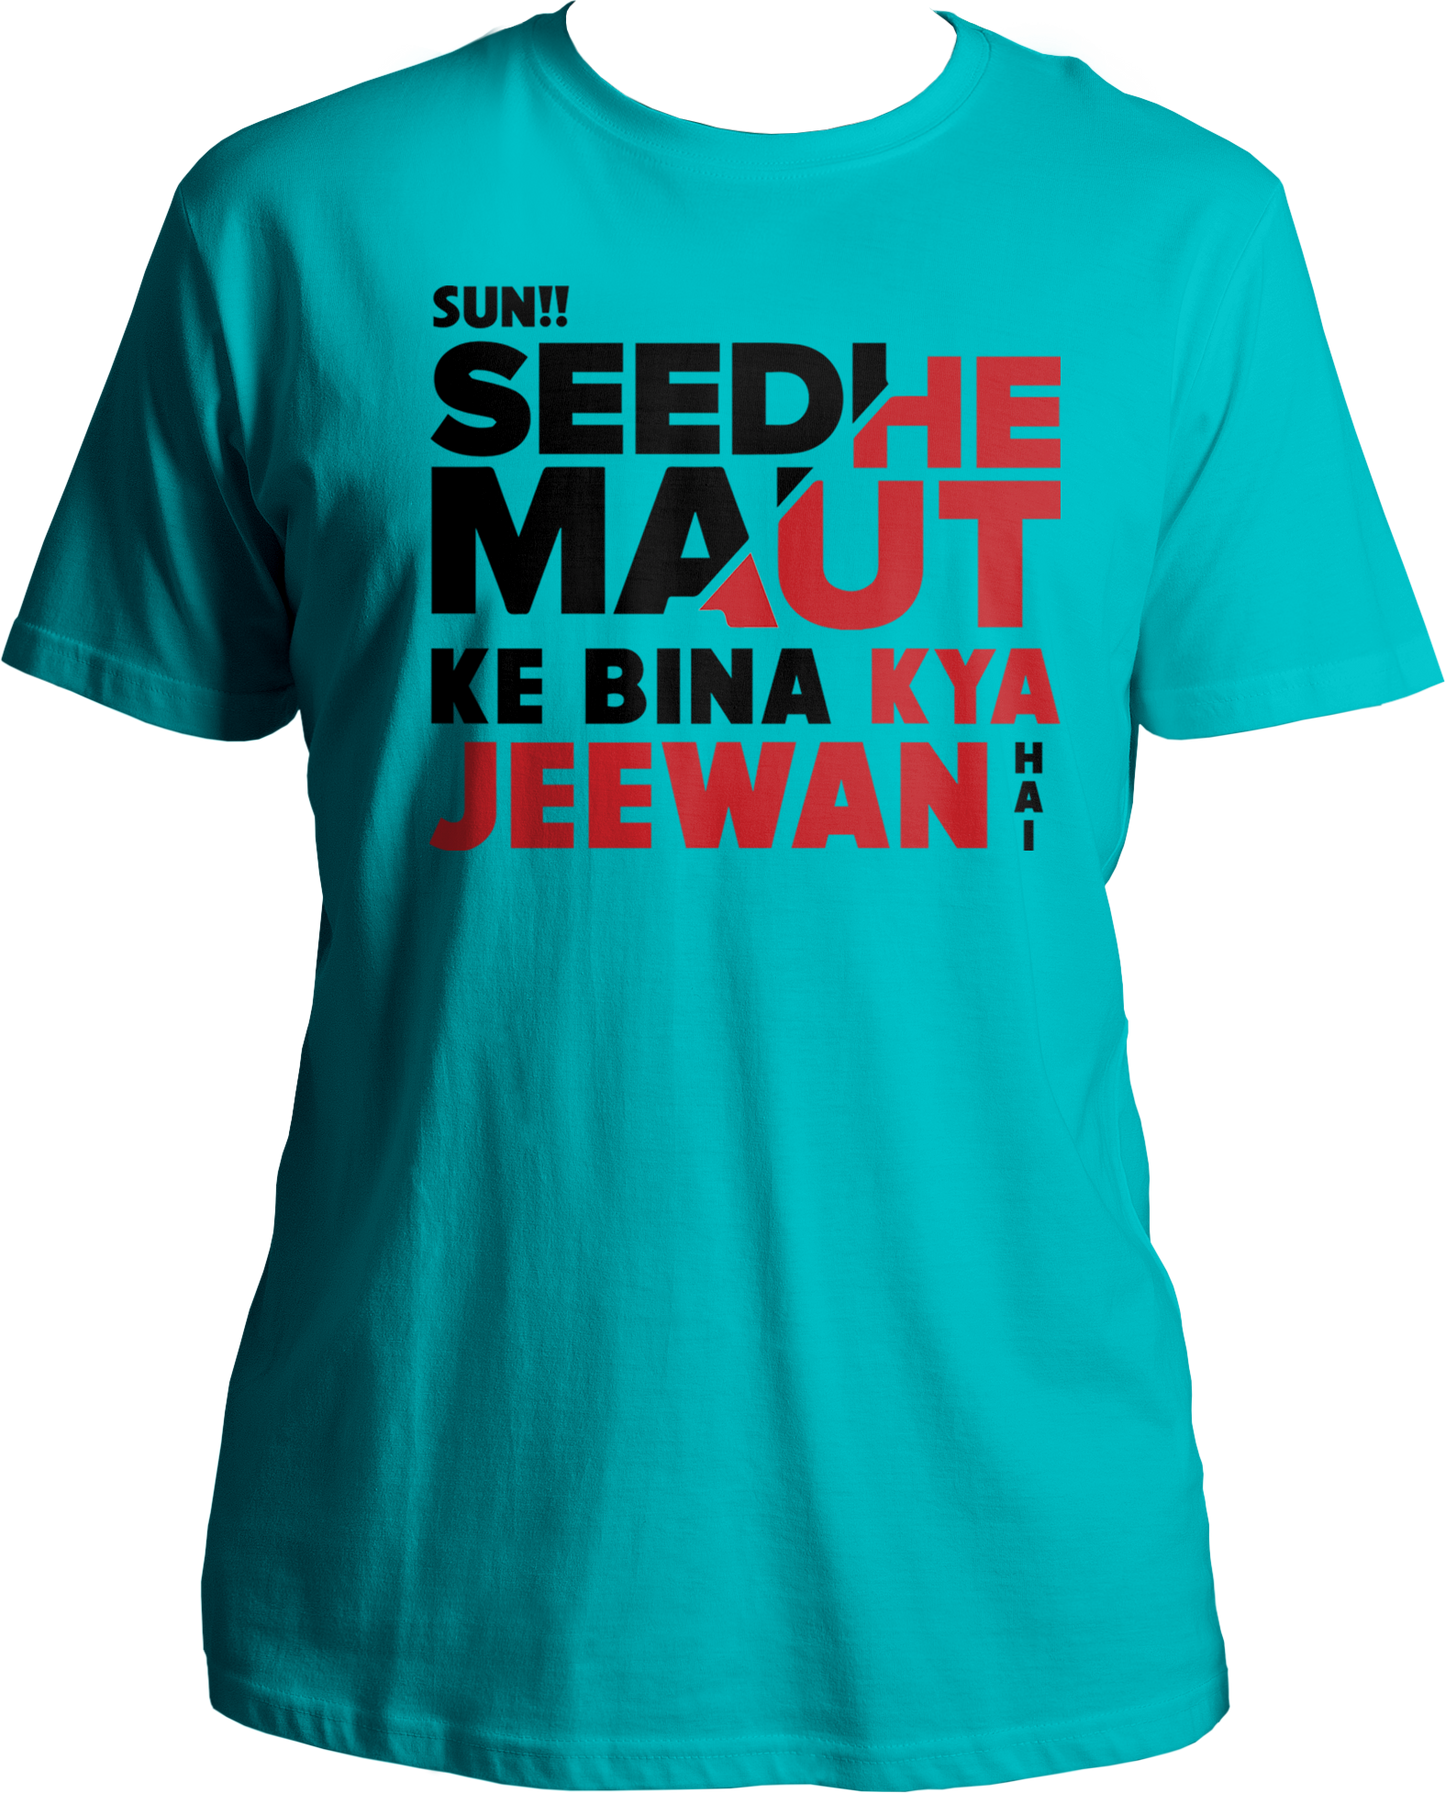 "Embrace the essence of Indian hip-hop with our exclusive Seedhe Maut T-shirt! Featuring the iconic phrase 'Seedhe Maut Ke Bina Kya Jeewan Hai' from the dynamic rap duo, this tee is a must-have for all hip-hop enthusiasts.  Seedhe Maut, with their raw talent and impactful lyrics, have carved a niche in the music industry. Now, you can flaunt your admiration for their artistry with this stylish and meaningful tee.